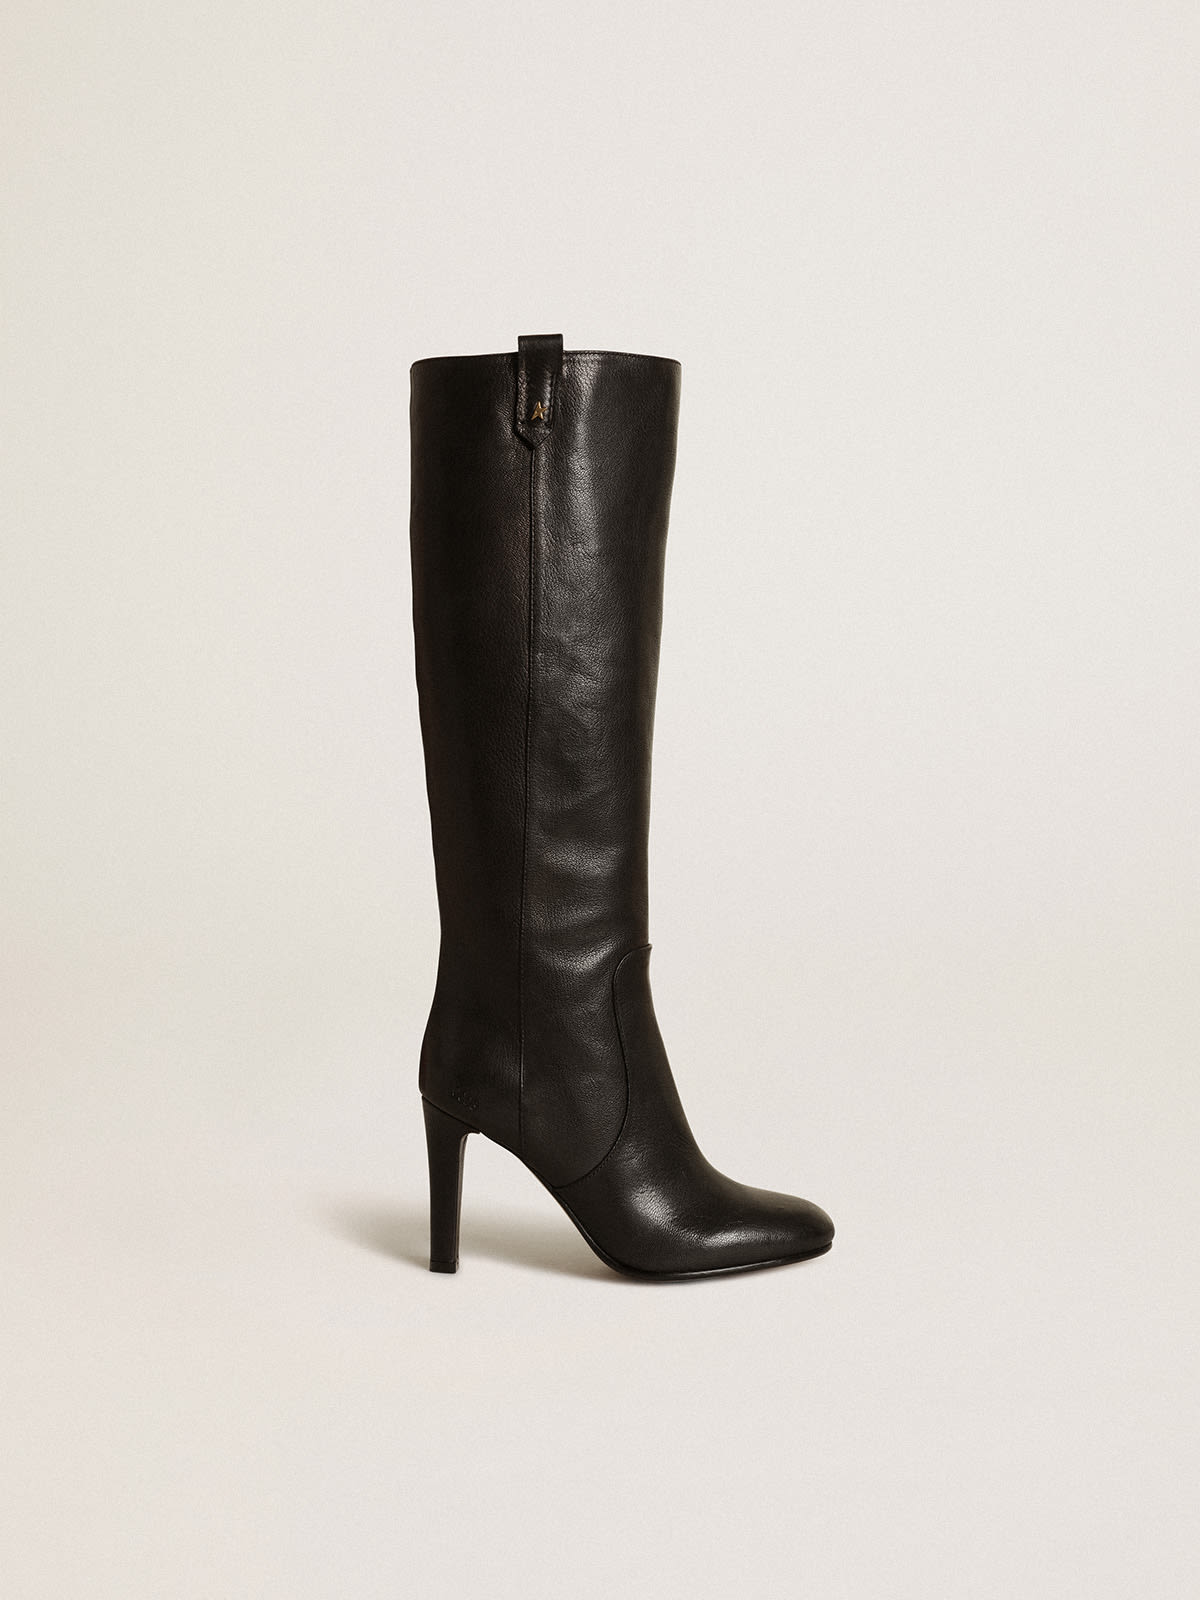 Golden Goose - Helen boots in black leather in 